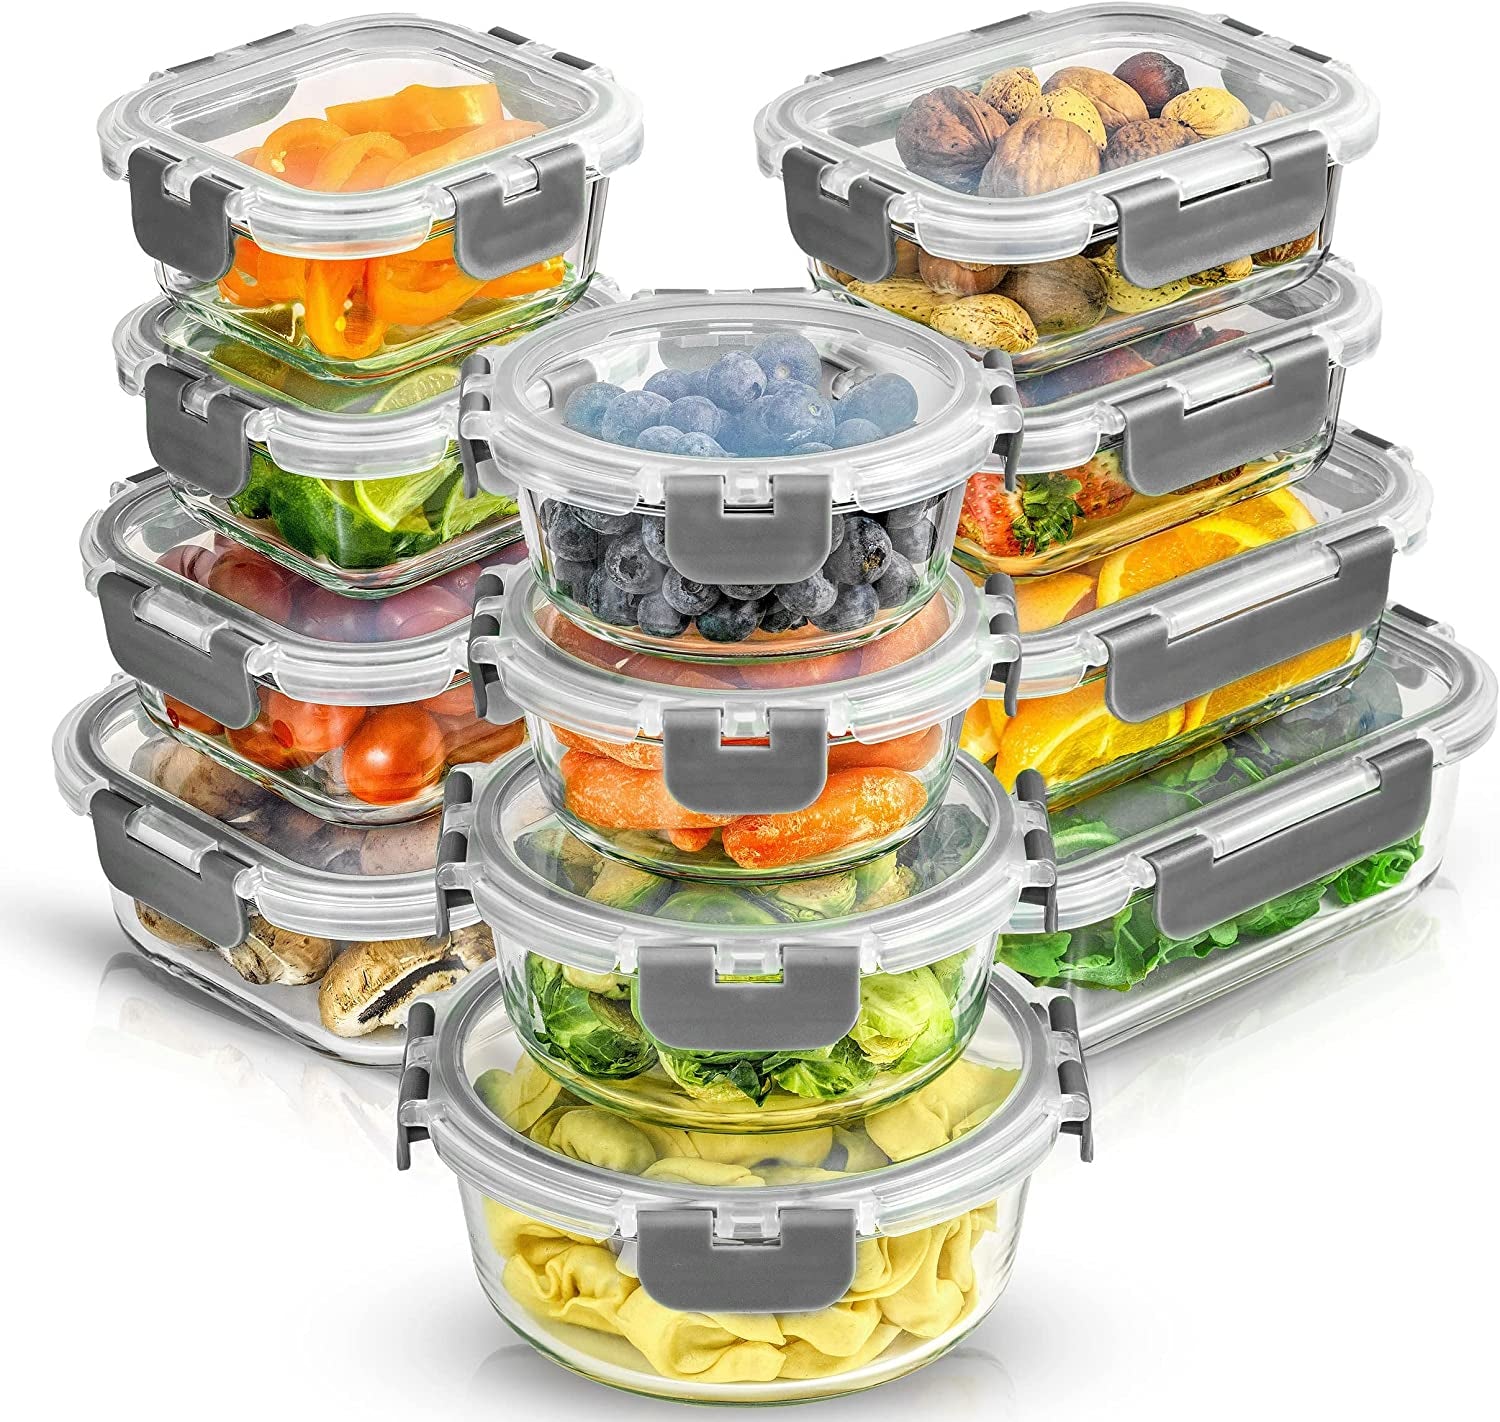 Joyful by  24Pc Borosilicate Glass Storage Containers with Lids. 12 Airtight, Freezer Safe Food Storage Containers, Pantry Kitchen Storage Containers, Glass Meal Prep Container for Lunch